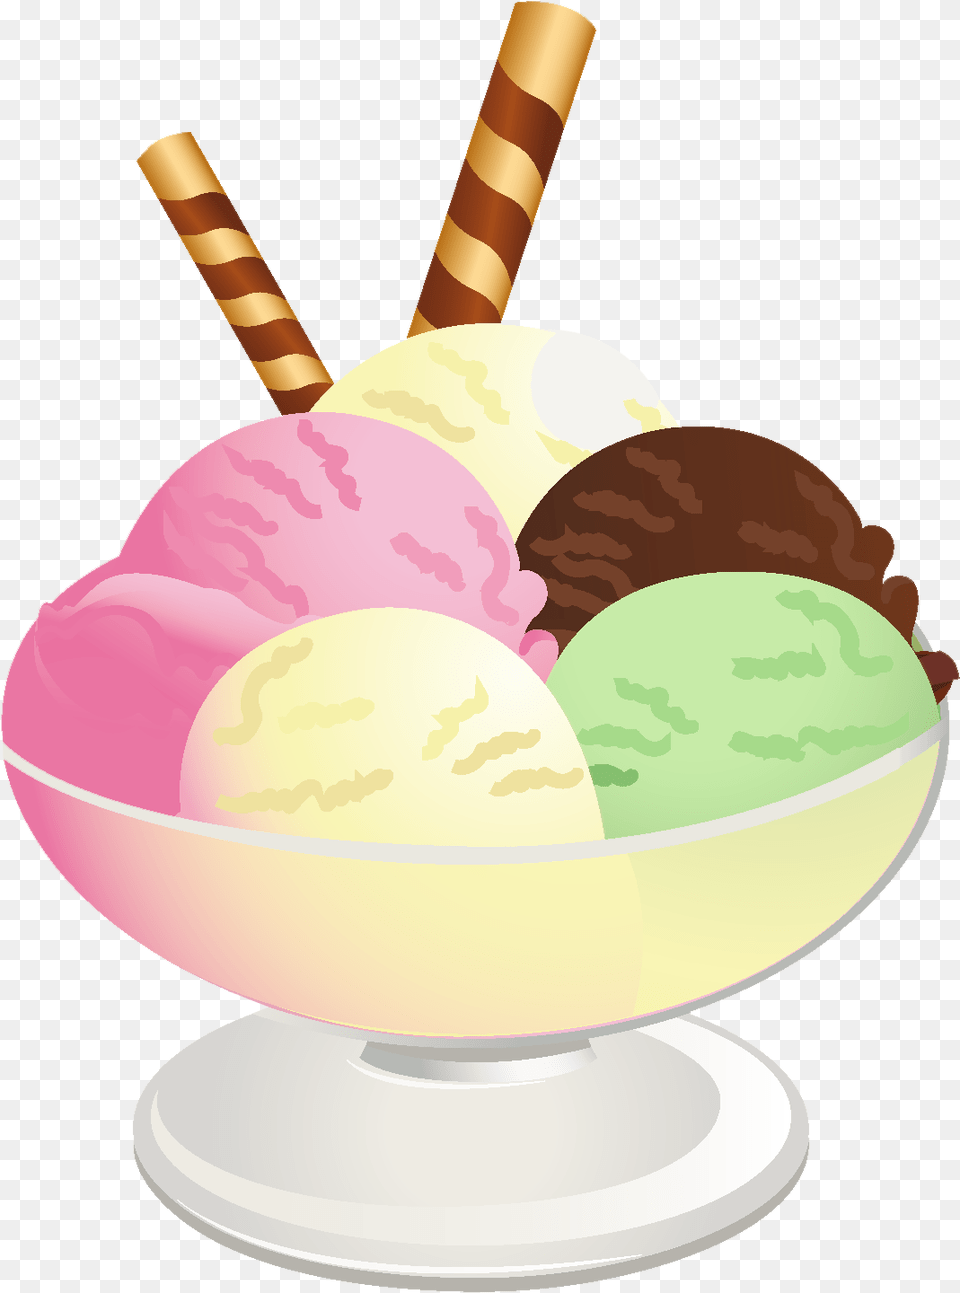 Library Of Apple Pie With Ice Cream Graphic Black And White Transparent Background Ice Cream Sundae Clipart, Dessert, Food, Ice Cream Png